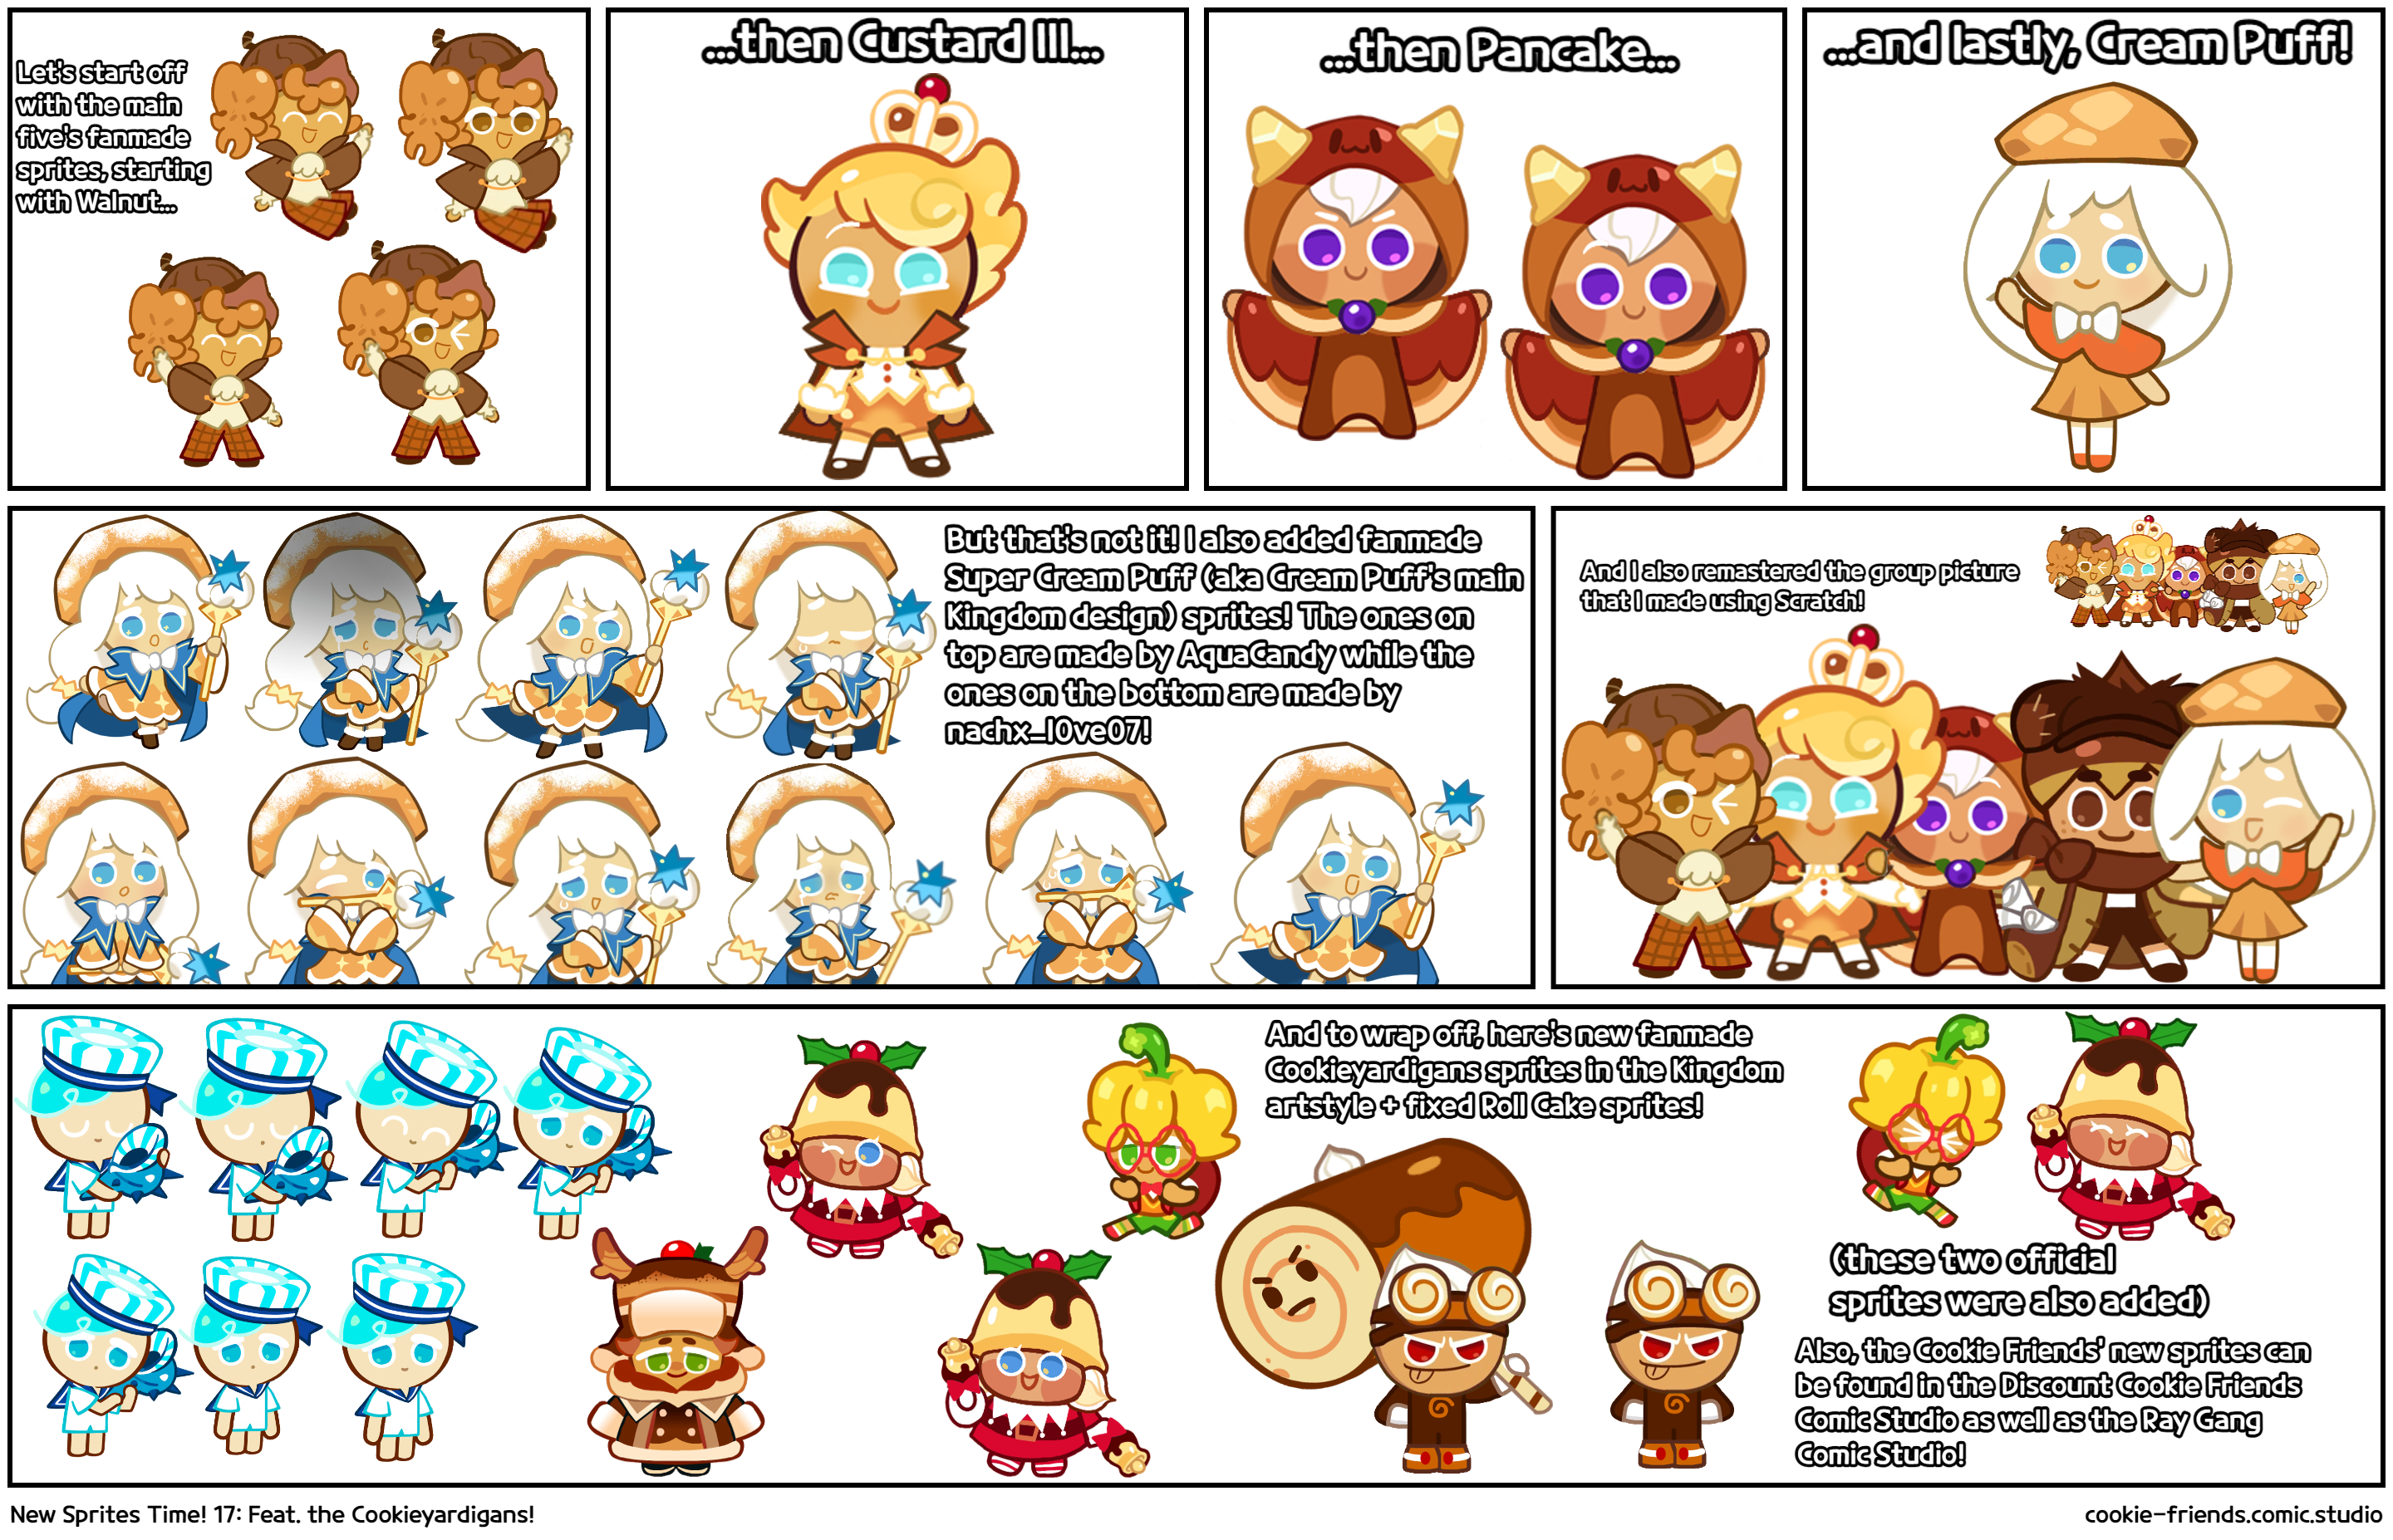 New Sprites Time! 17: Feat. the Cookieyardigans!